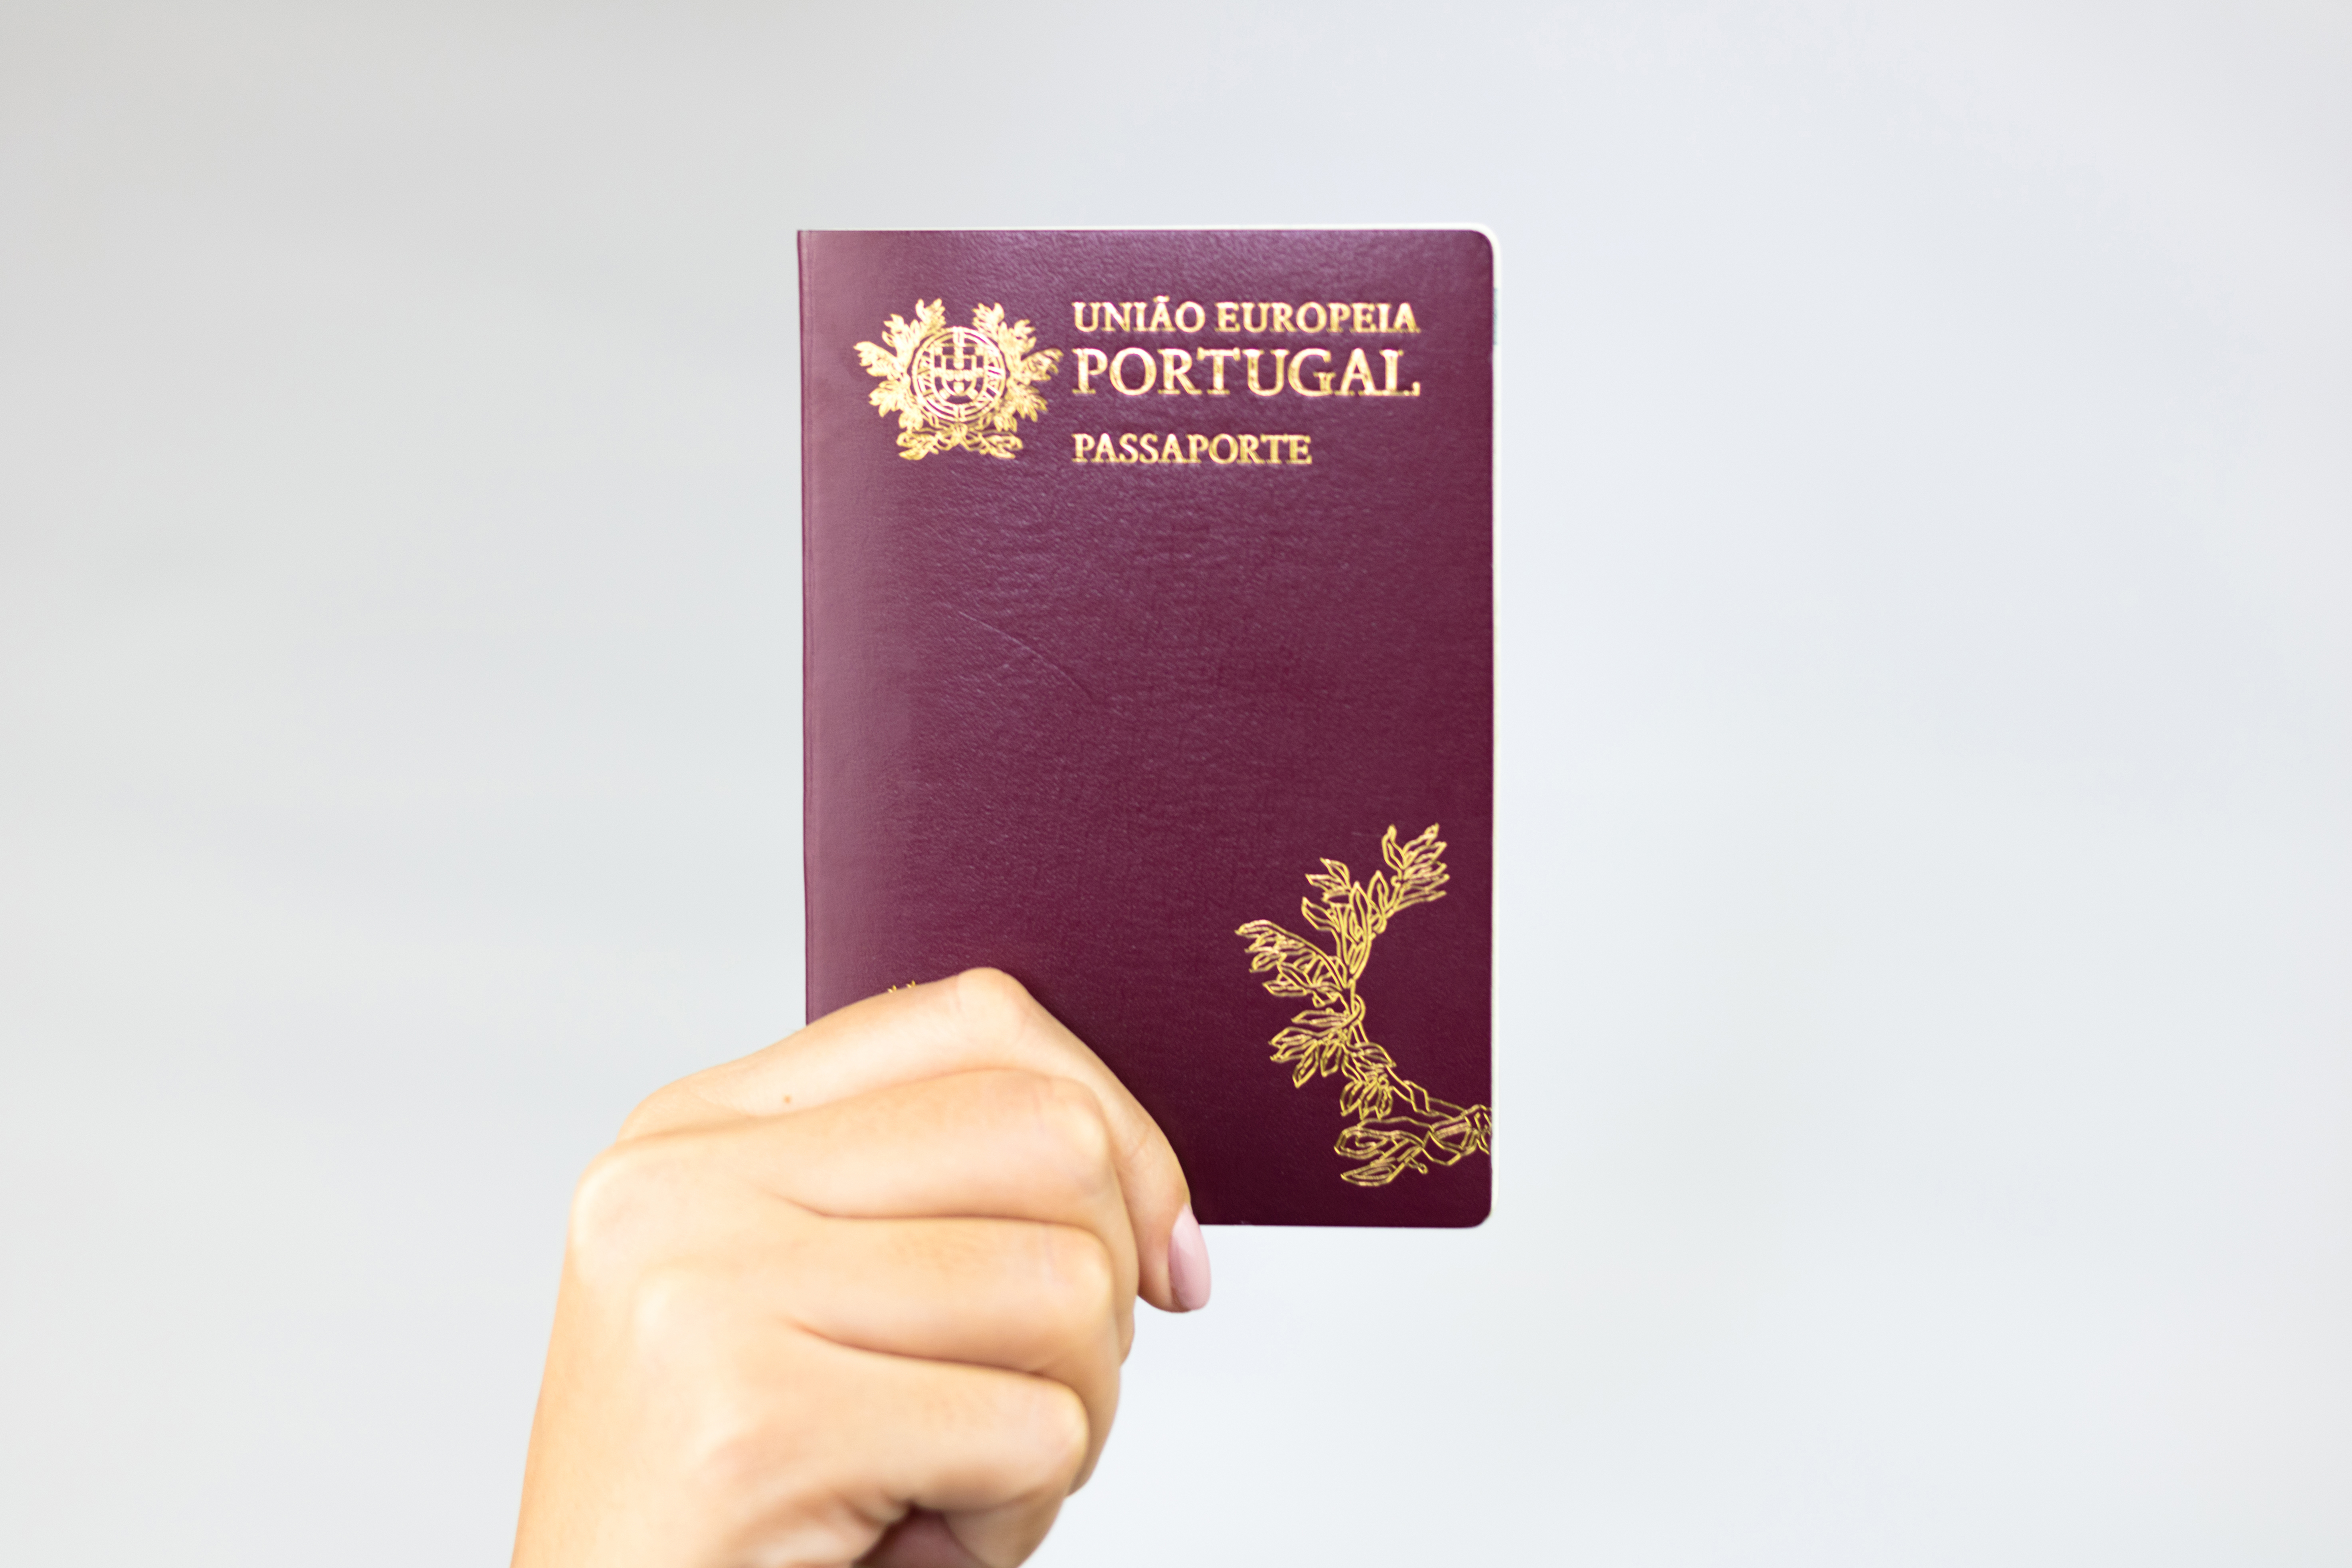 A Portuguese passport attests to the citizenship that follows a Portuguese residence permit through investment